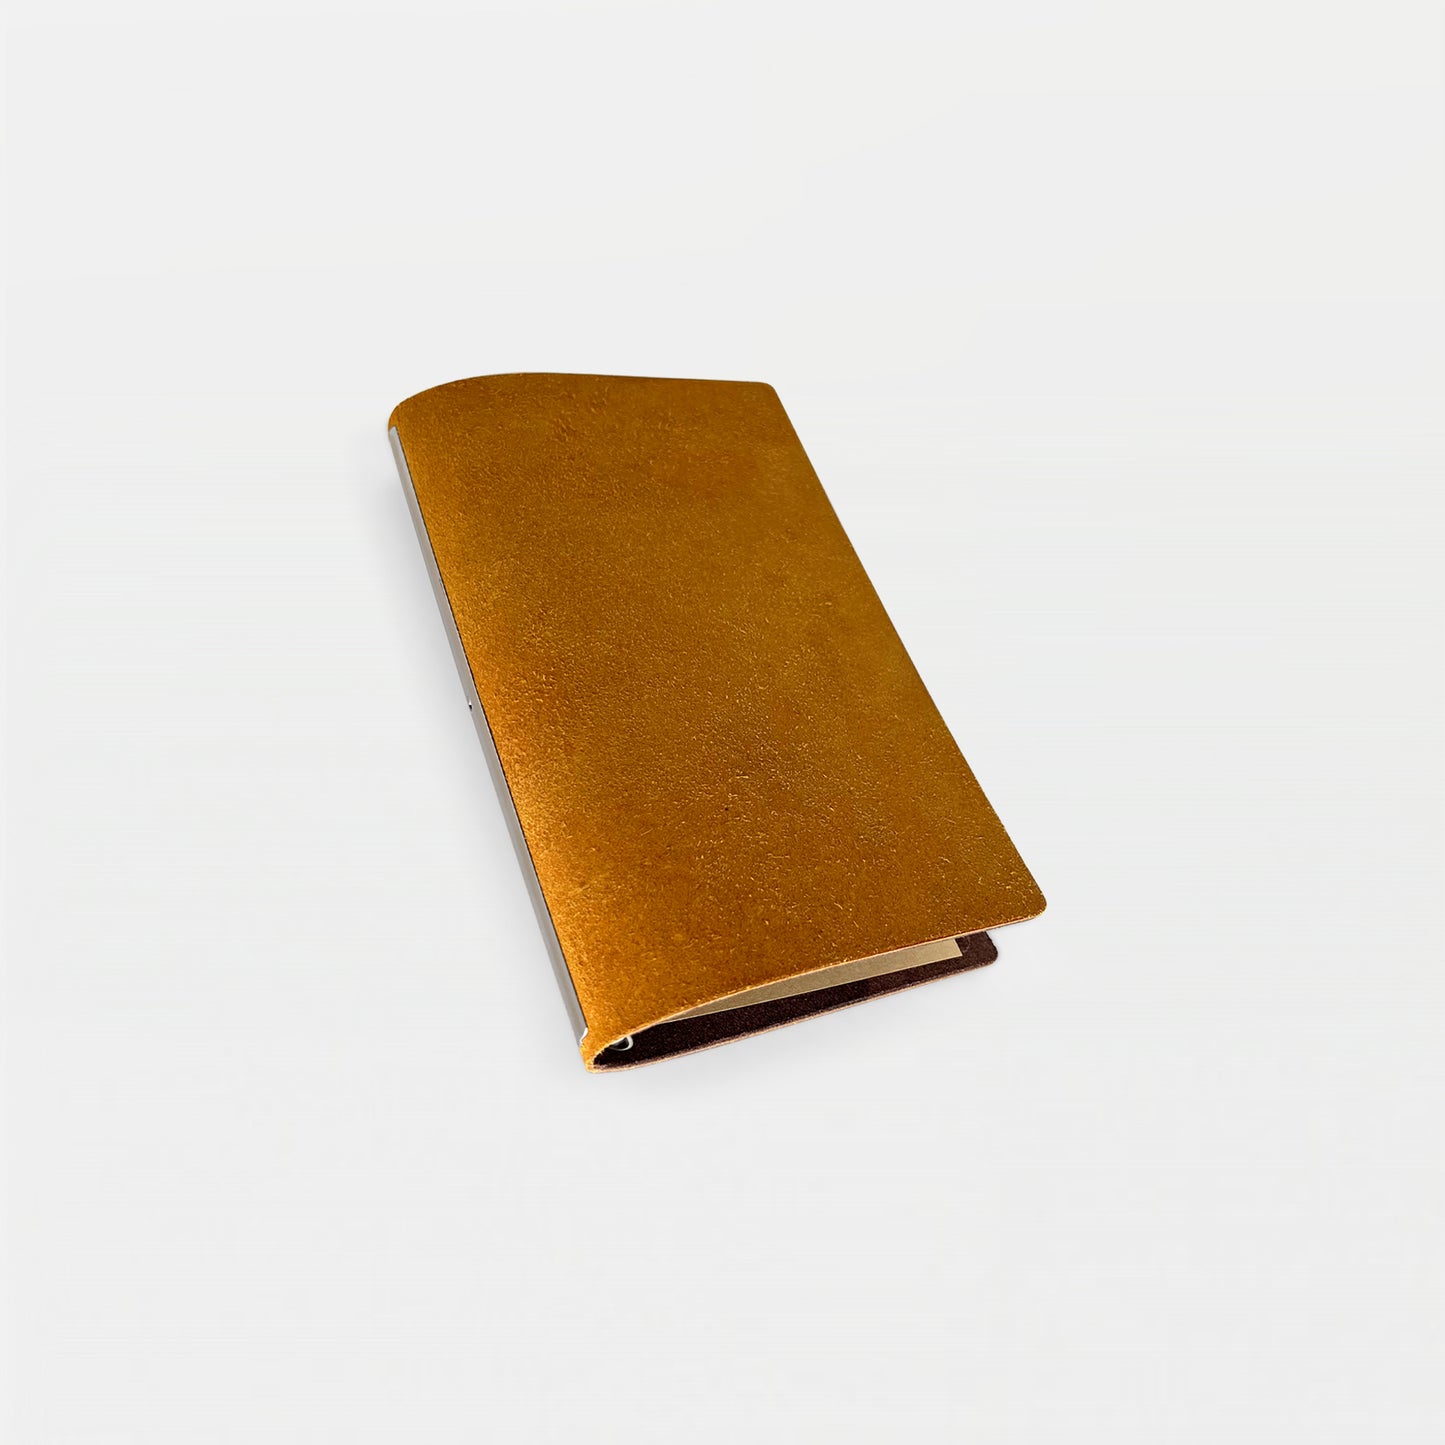 BINDER COVER / plyleather